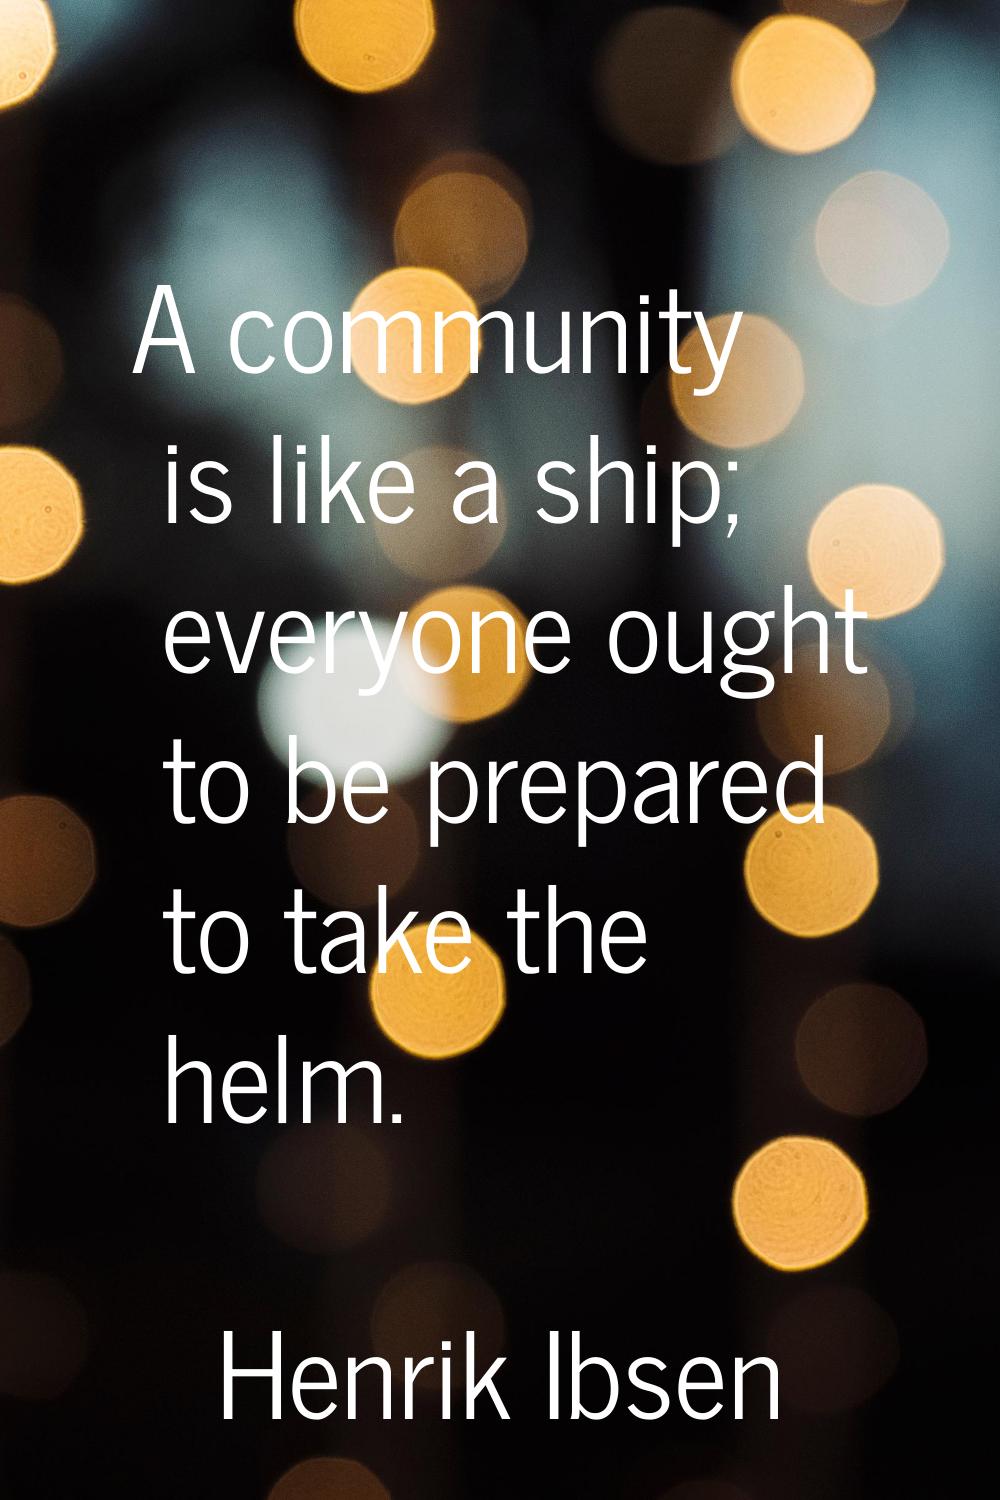 A community is like a ship; everyone ought to be prepared to take the helm.